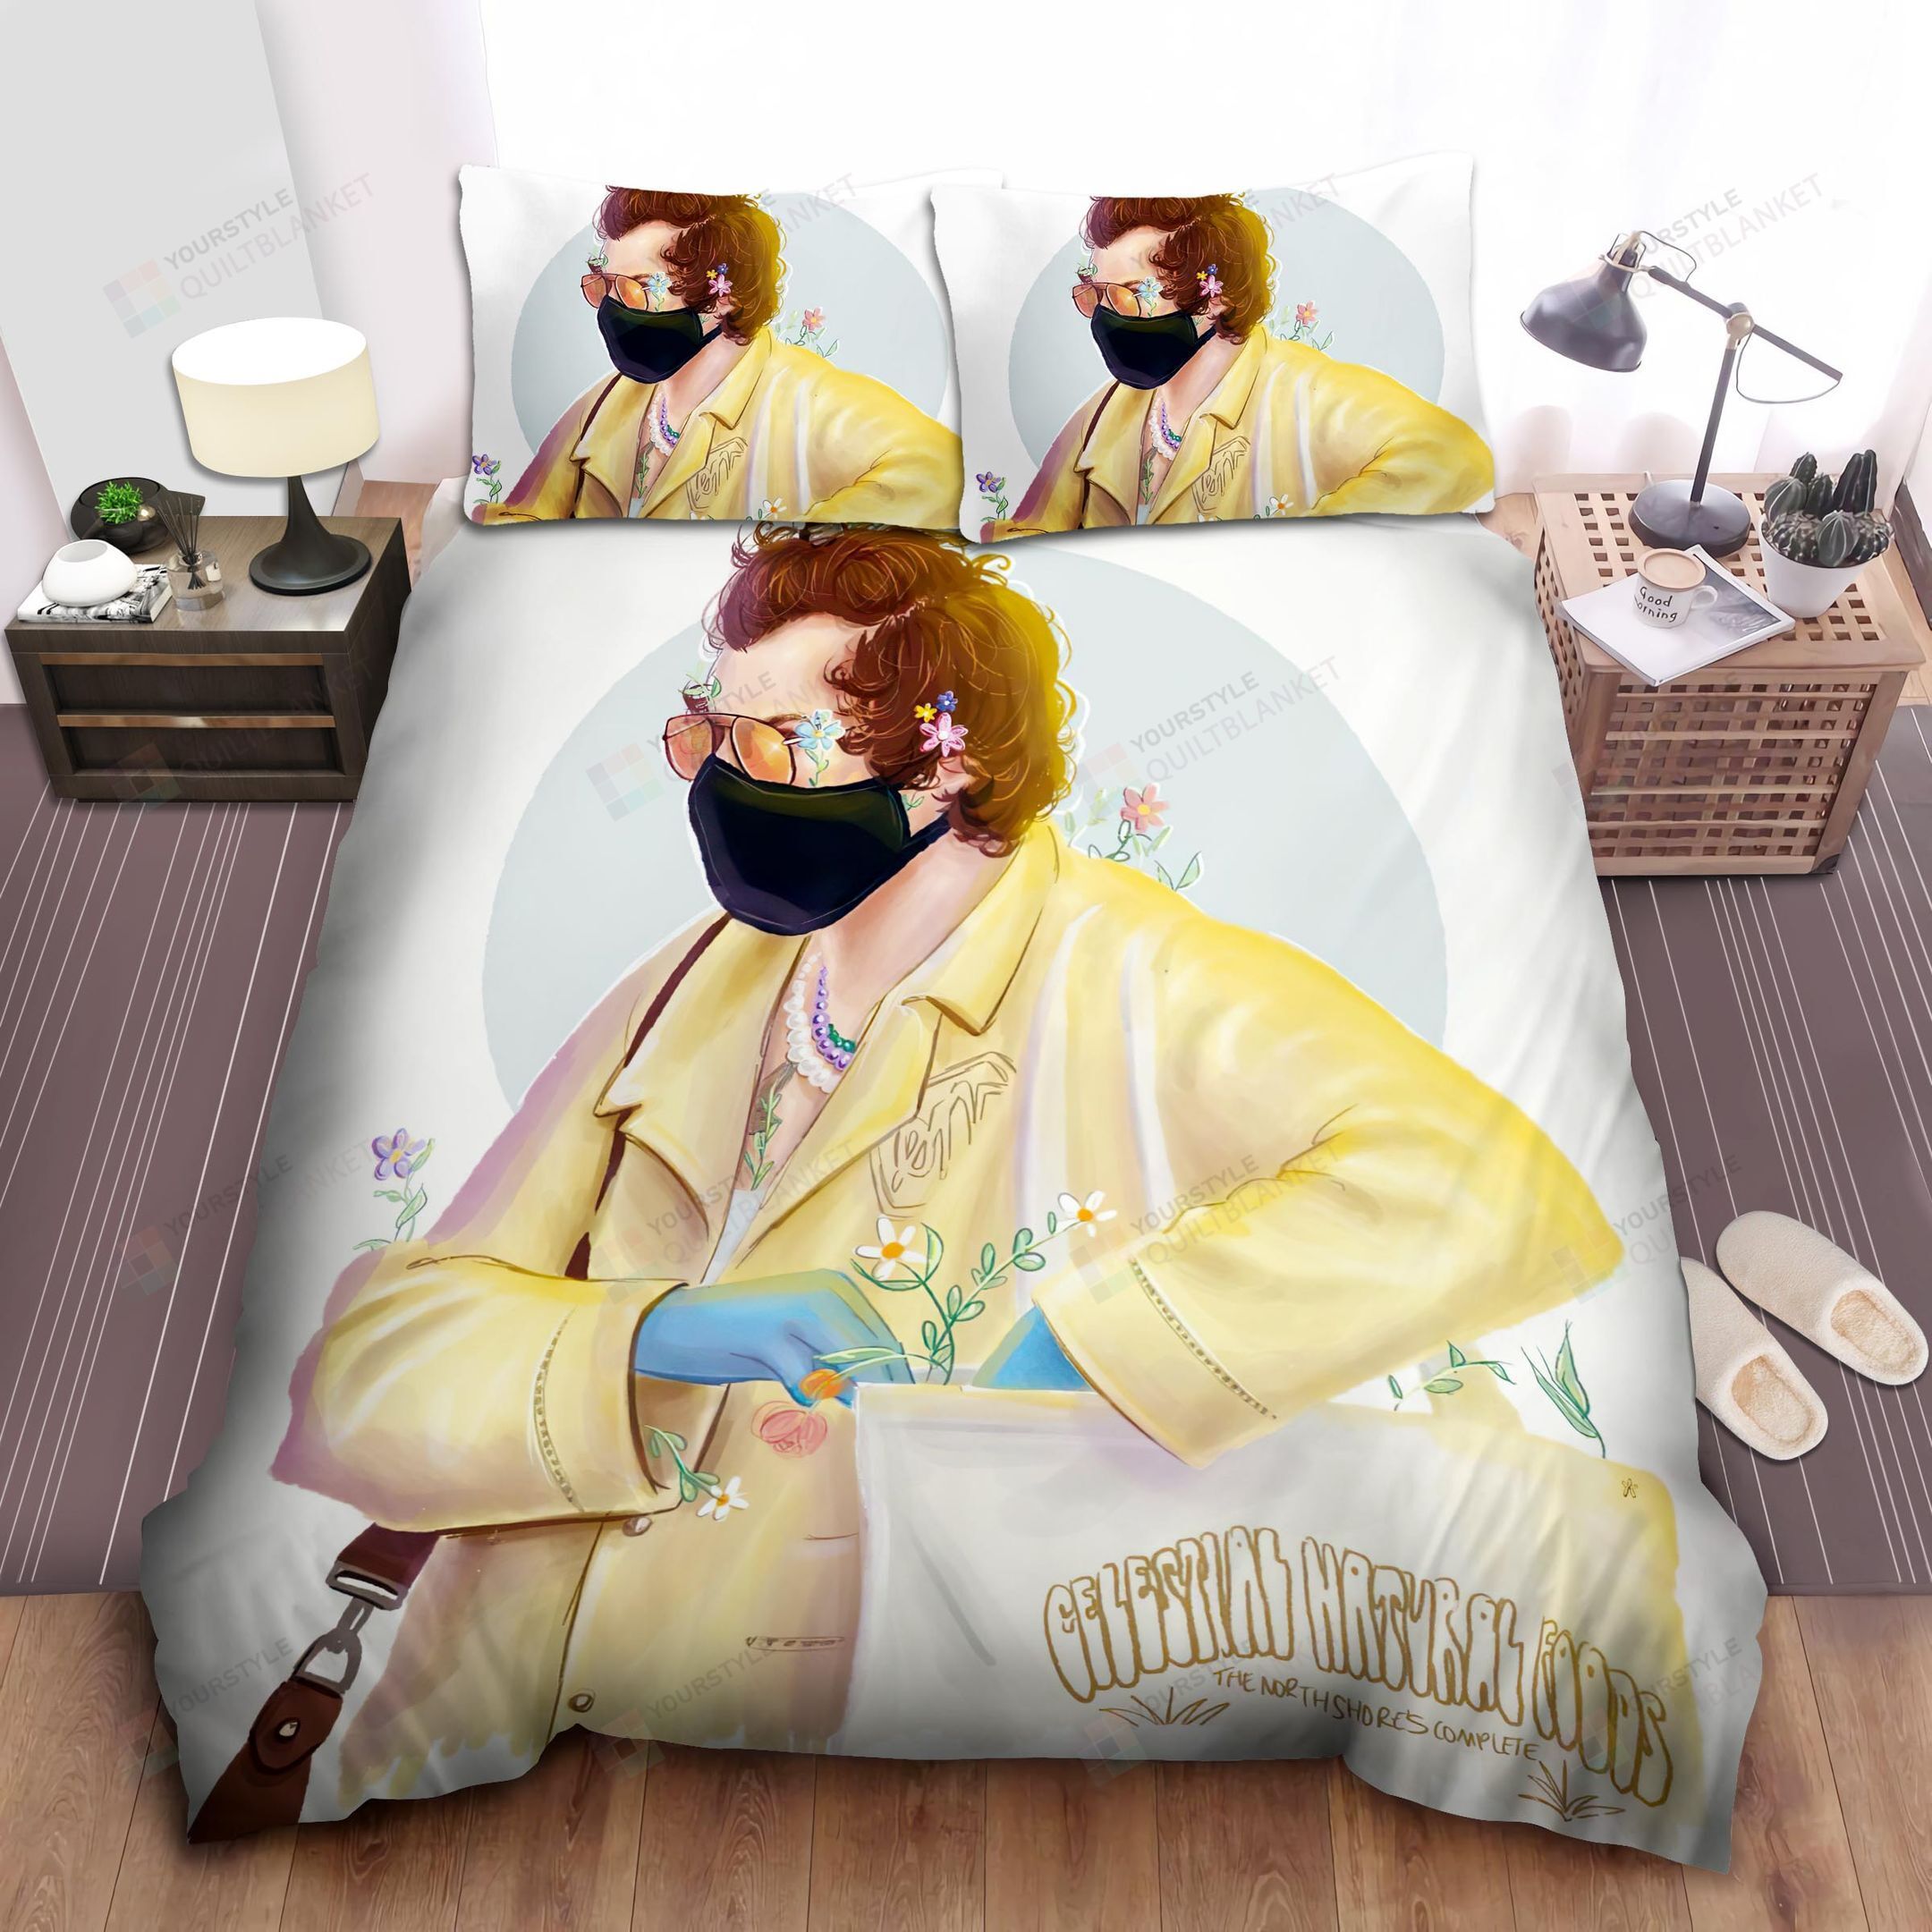 Harry Styles Bed Sheets Spread Comforter Duvet Cover Bedding Sets